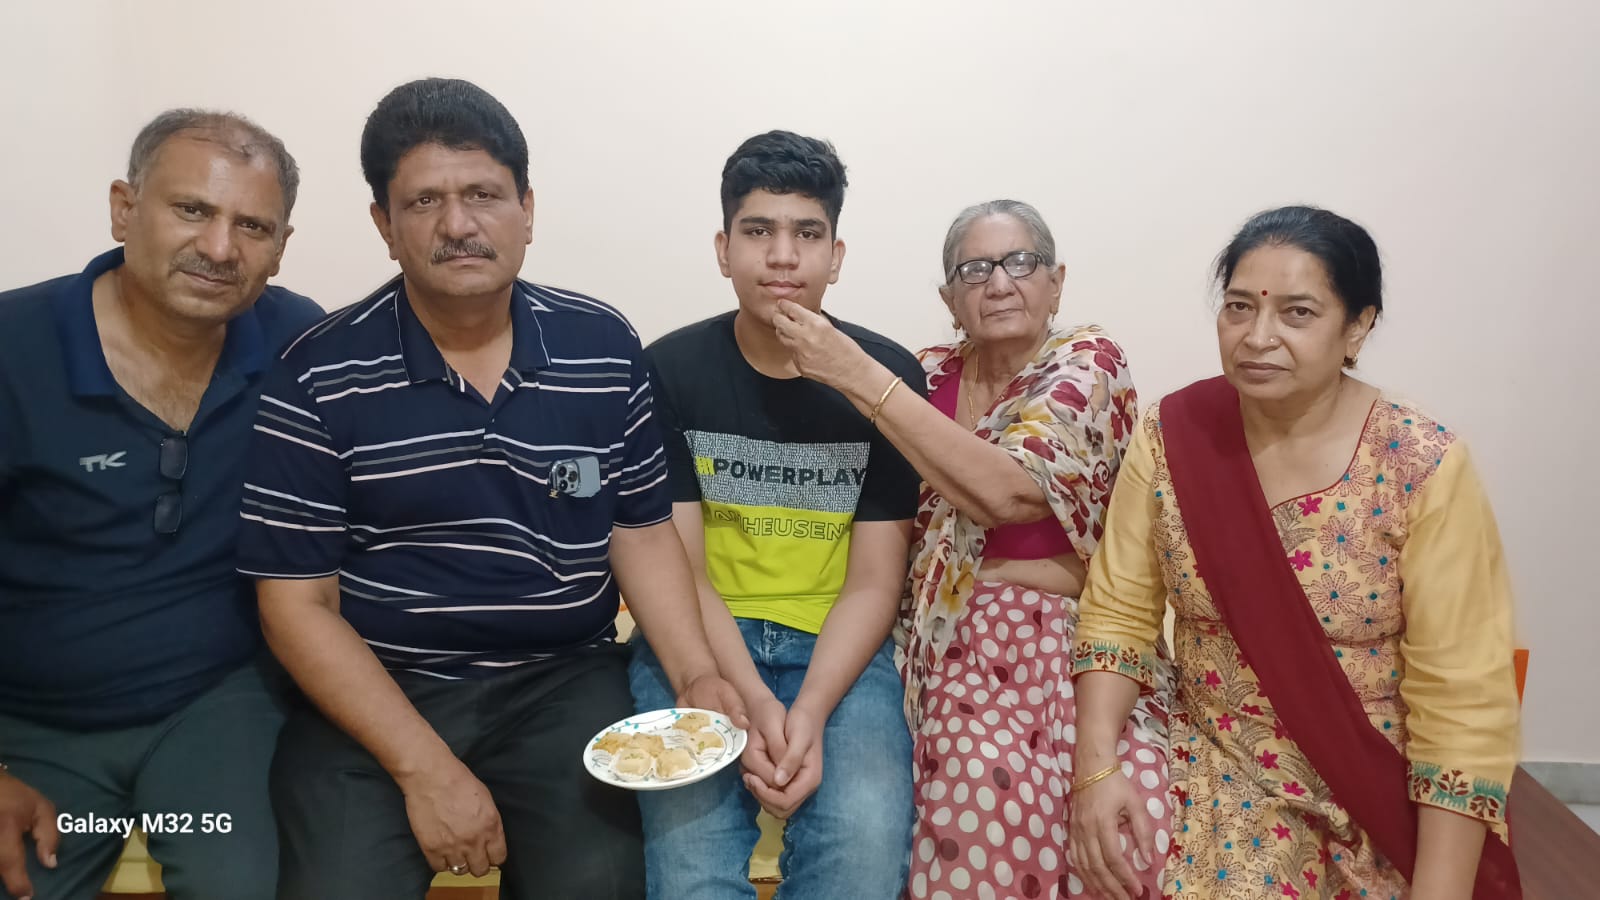 Mudit Singh brought honor to his family by scoring 95.8 percent marks in CBSE 10th exam.